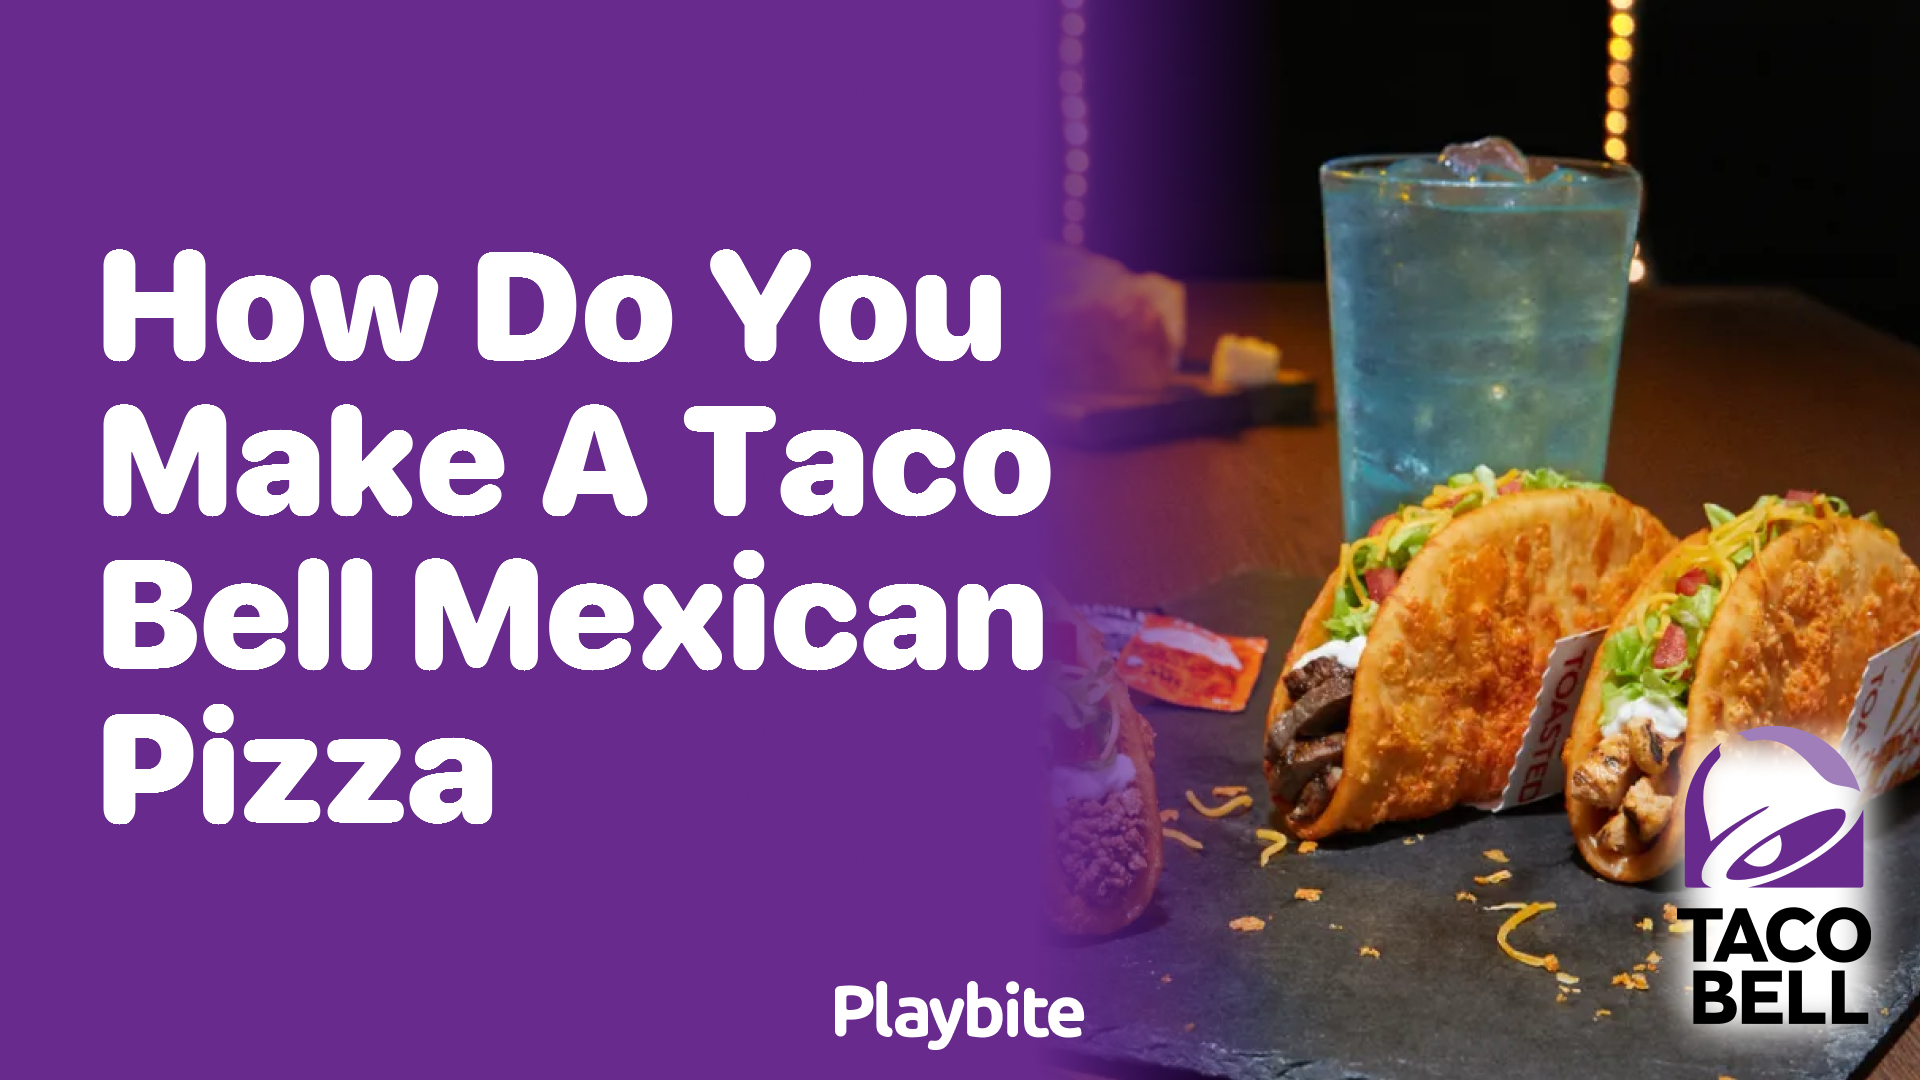 How Do You Make a Taco Bell Mexican Pizza?